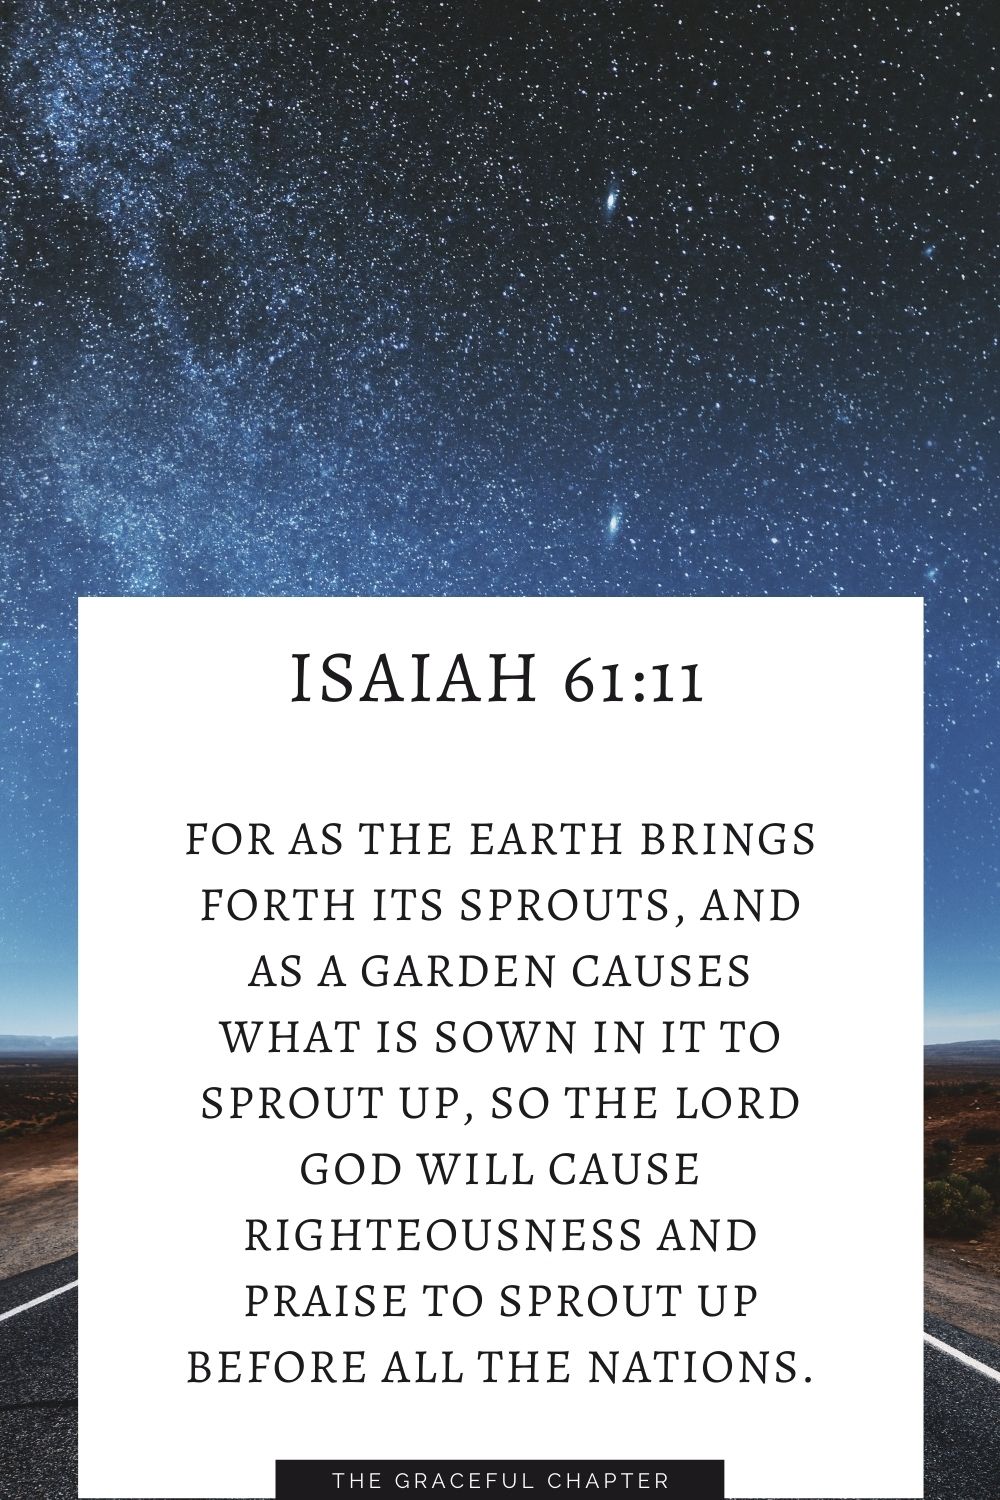 For as the earth brings forth its sprouts, and as a garden causes what is sown in it to sprout up, so the Lord God will cause righteousness and praise to sprout up before all the nations. Isaiah 61:11